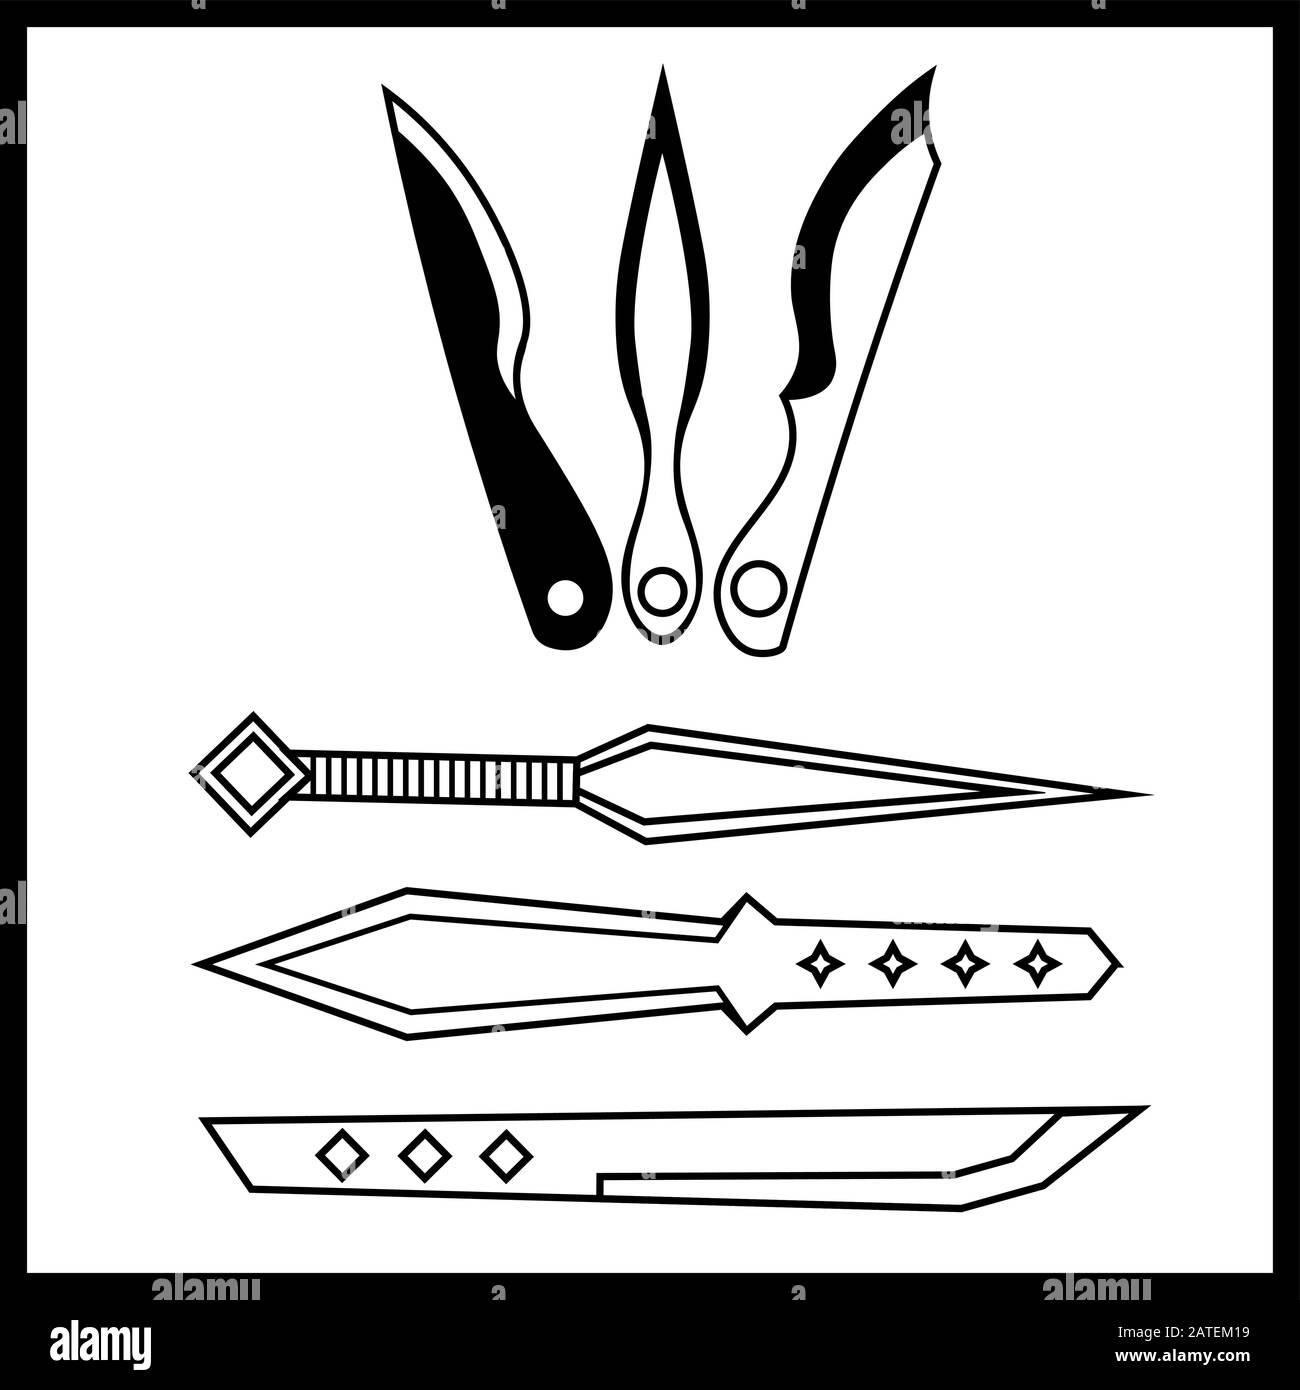 Concept illustration of six isolated black and white throwing knives Stock Vector